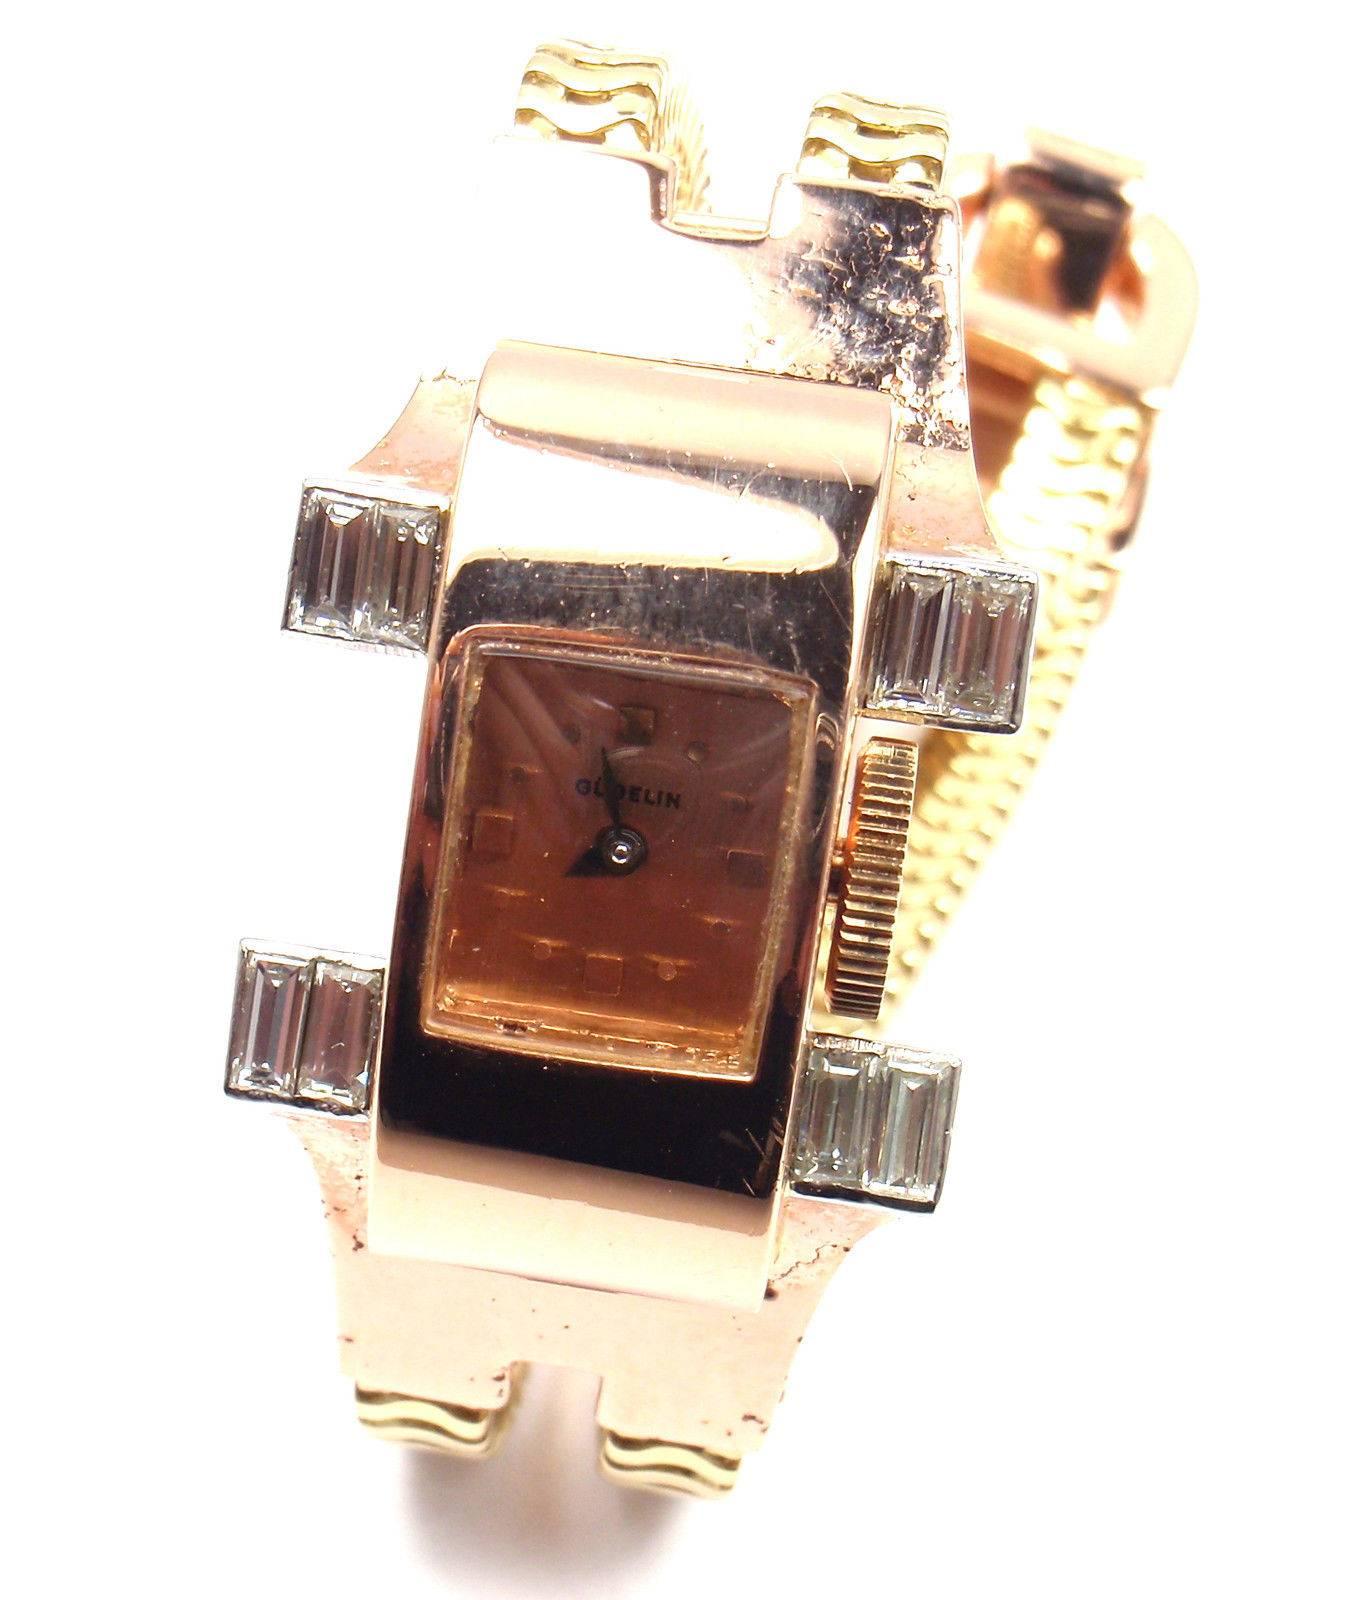 Vintage Gubelin Ladies 18k rose and yellow gold diamond wristwatch.
With 8 emerald cut diamonds VS1 clarity E color total weight approx. .96ct
Details: 
Case Dimensions: 28mm x 12mm
Length: 7